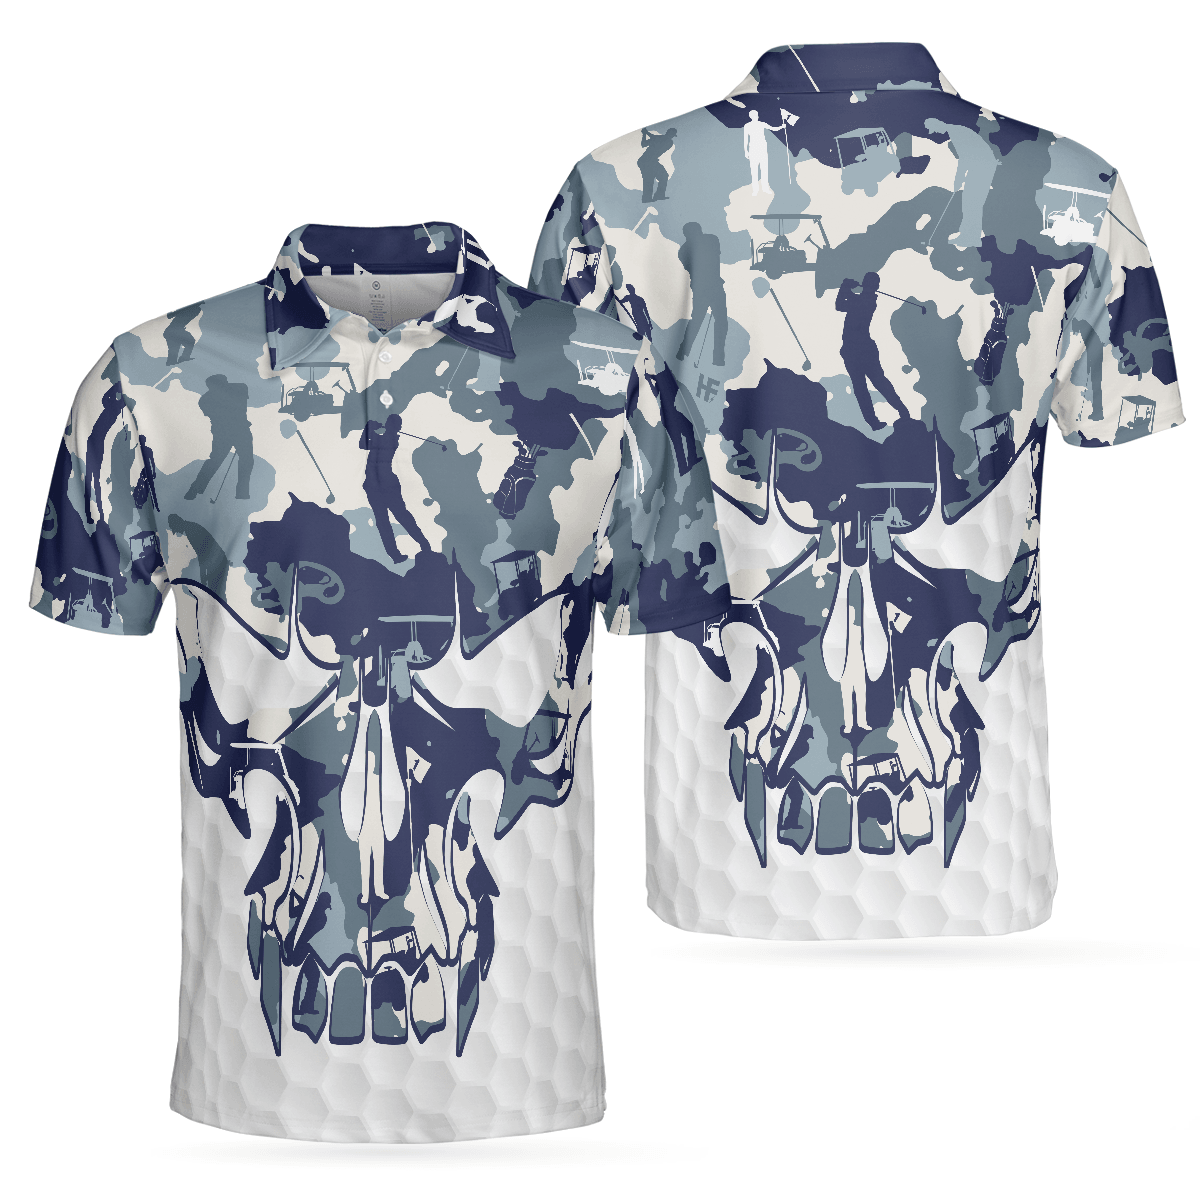 Men Golf Polo Shirt - Blue And White Camouflage Golf Set Skull Golf Polo Shirt, Best Camo Golf Shirt For Men, Golfers - Amzanimalsgift